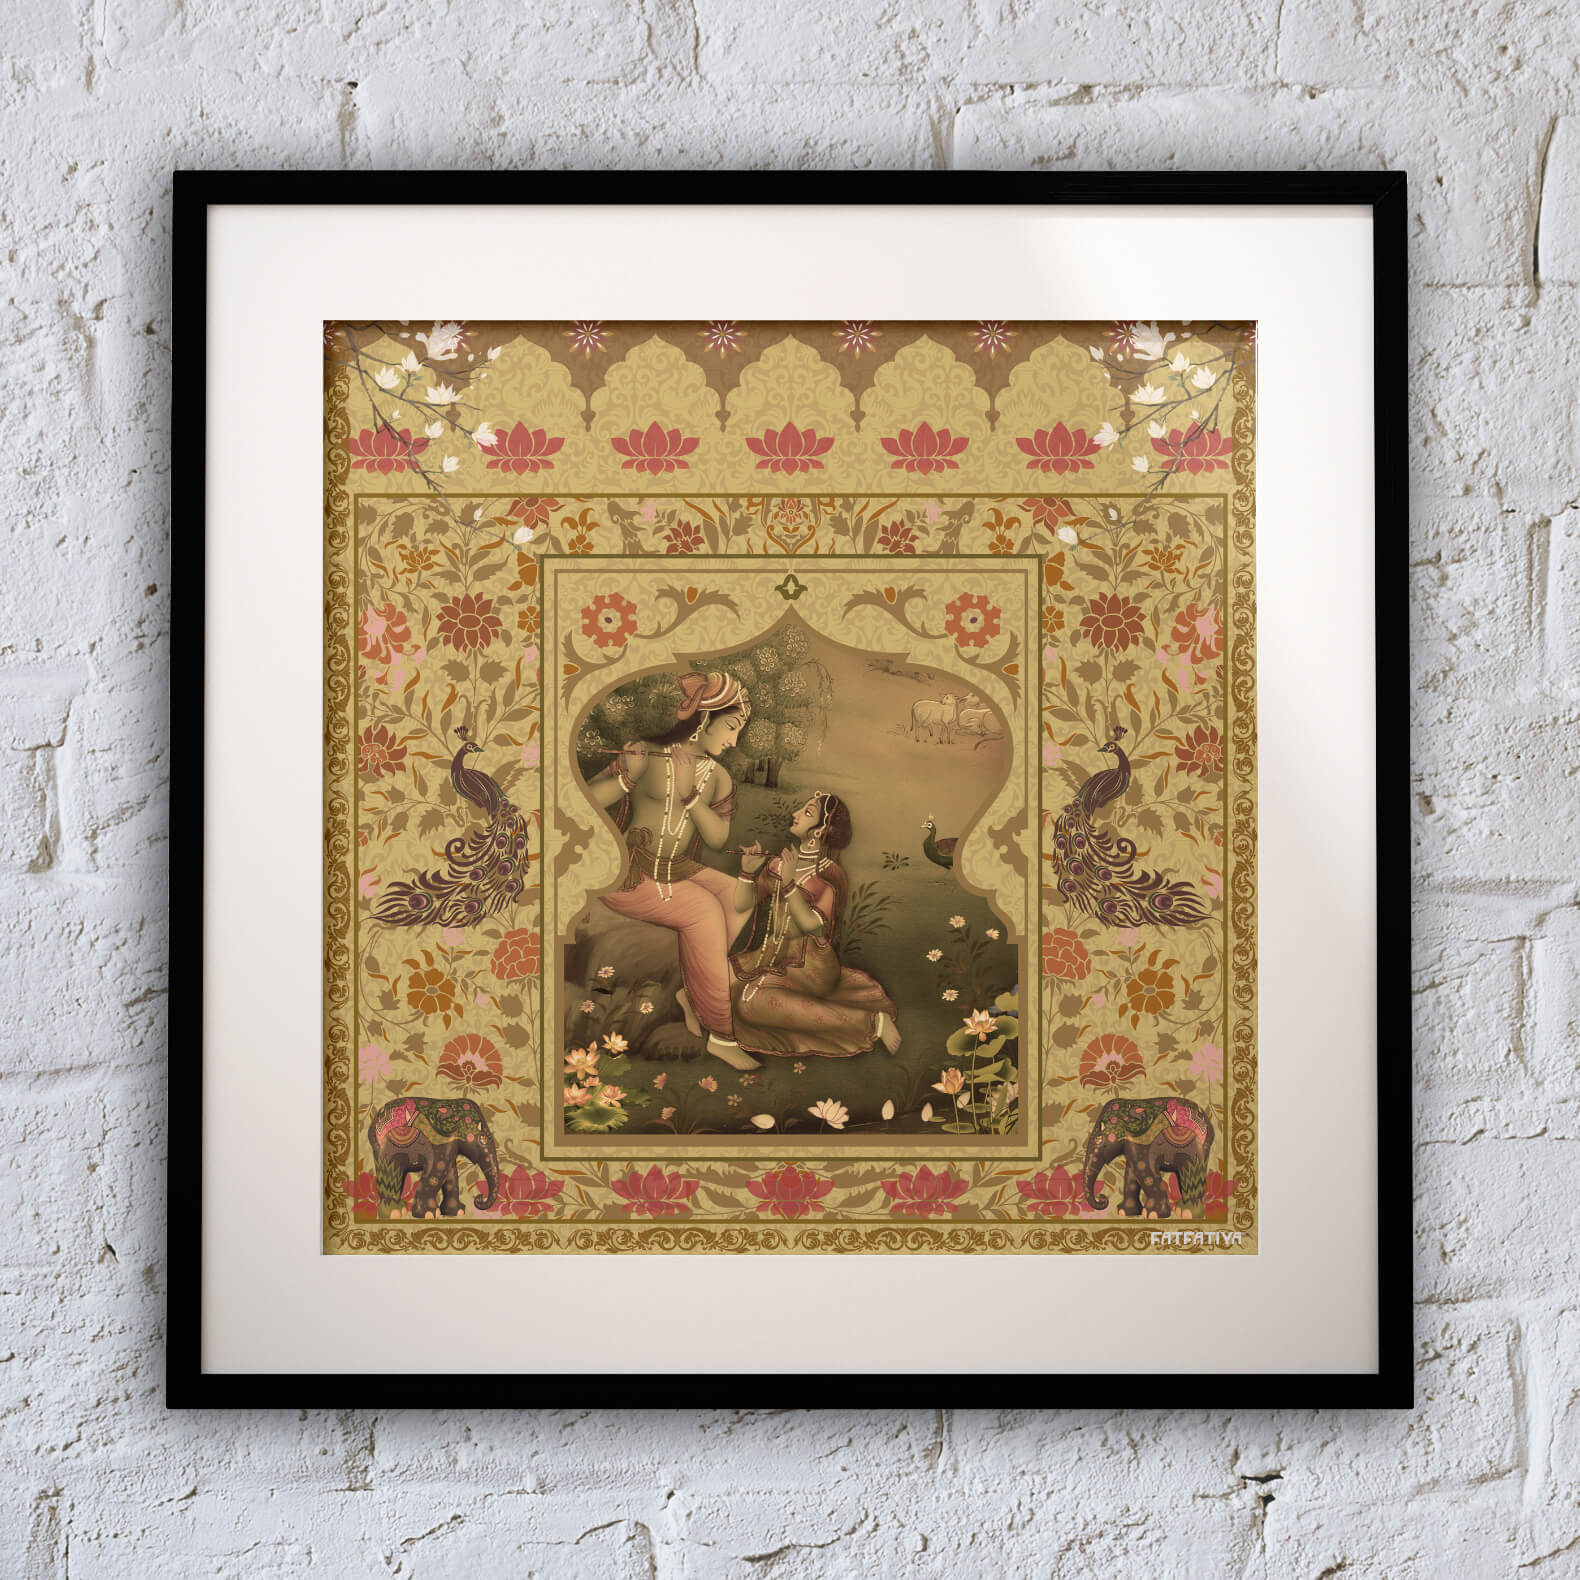 Buy Affordable Wall Art Print Online in India